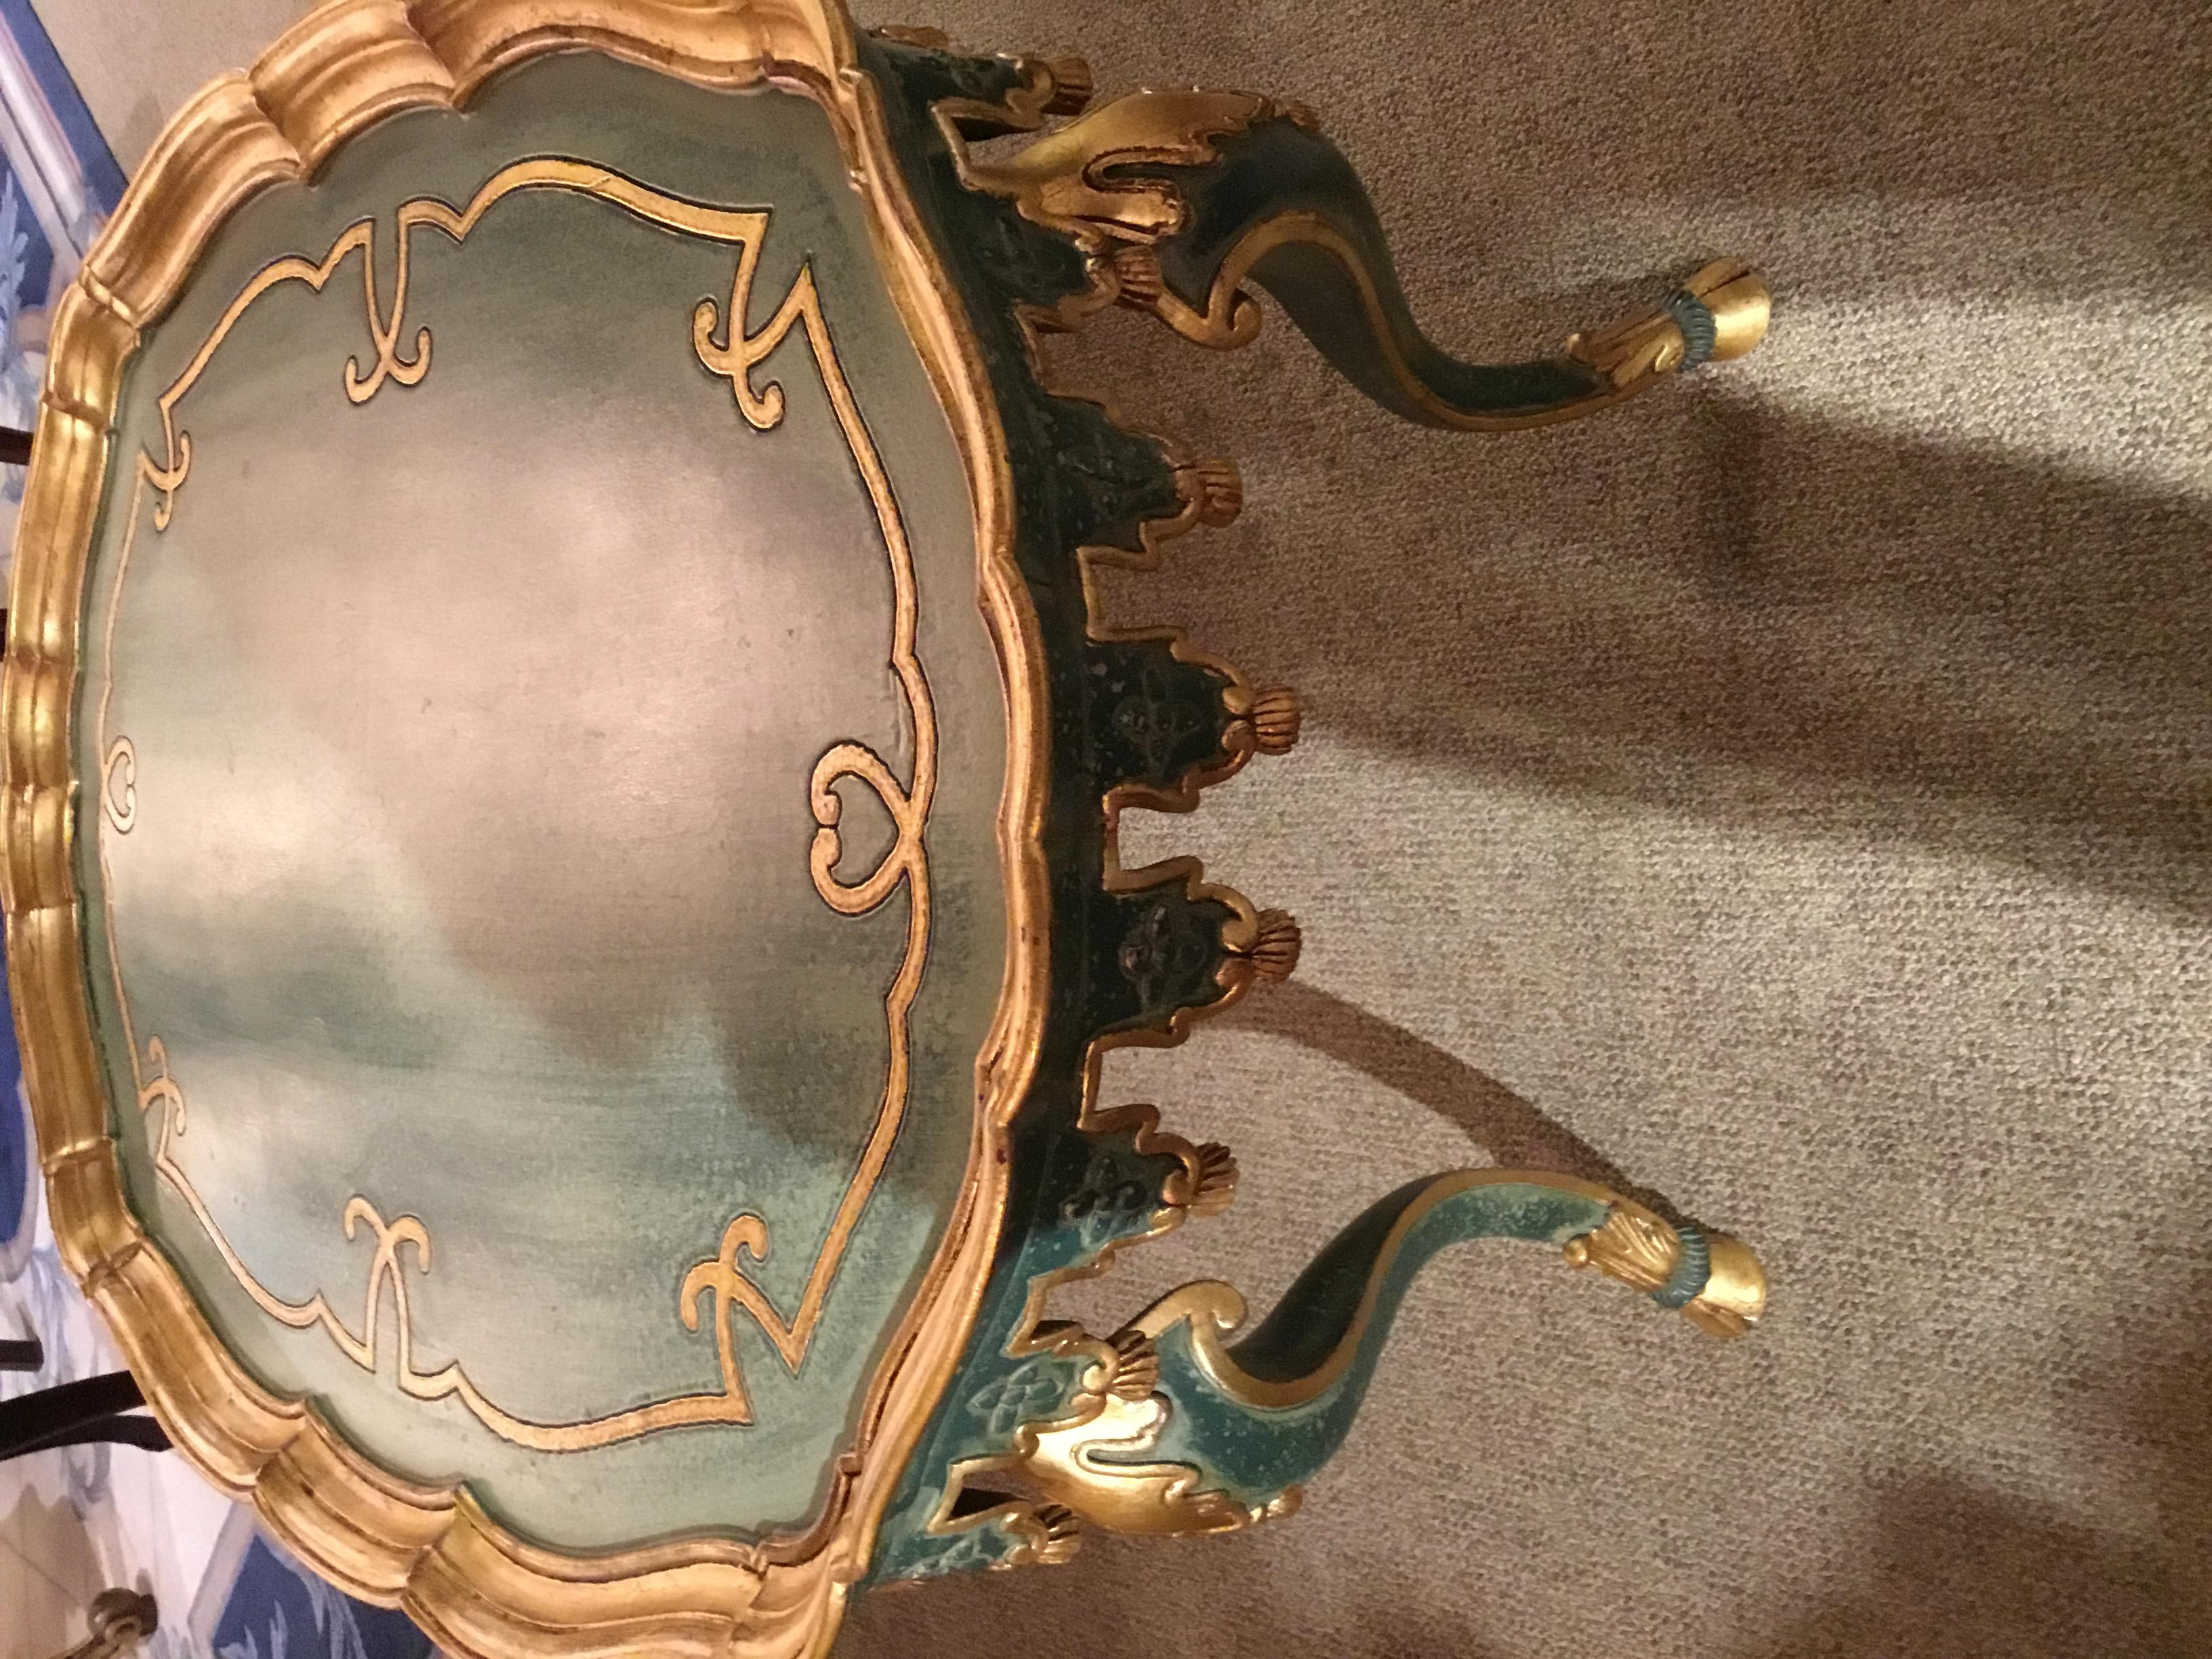 Beautifully shaped table in a graceful oval. Faux painted in shades of sea green with
Gold gilt edges. Carved and shaped tassel edge is also highlighted in gilt gold.